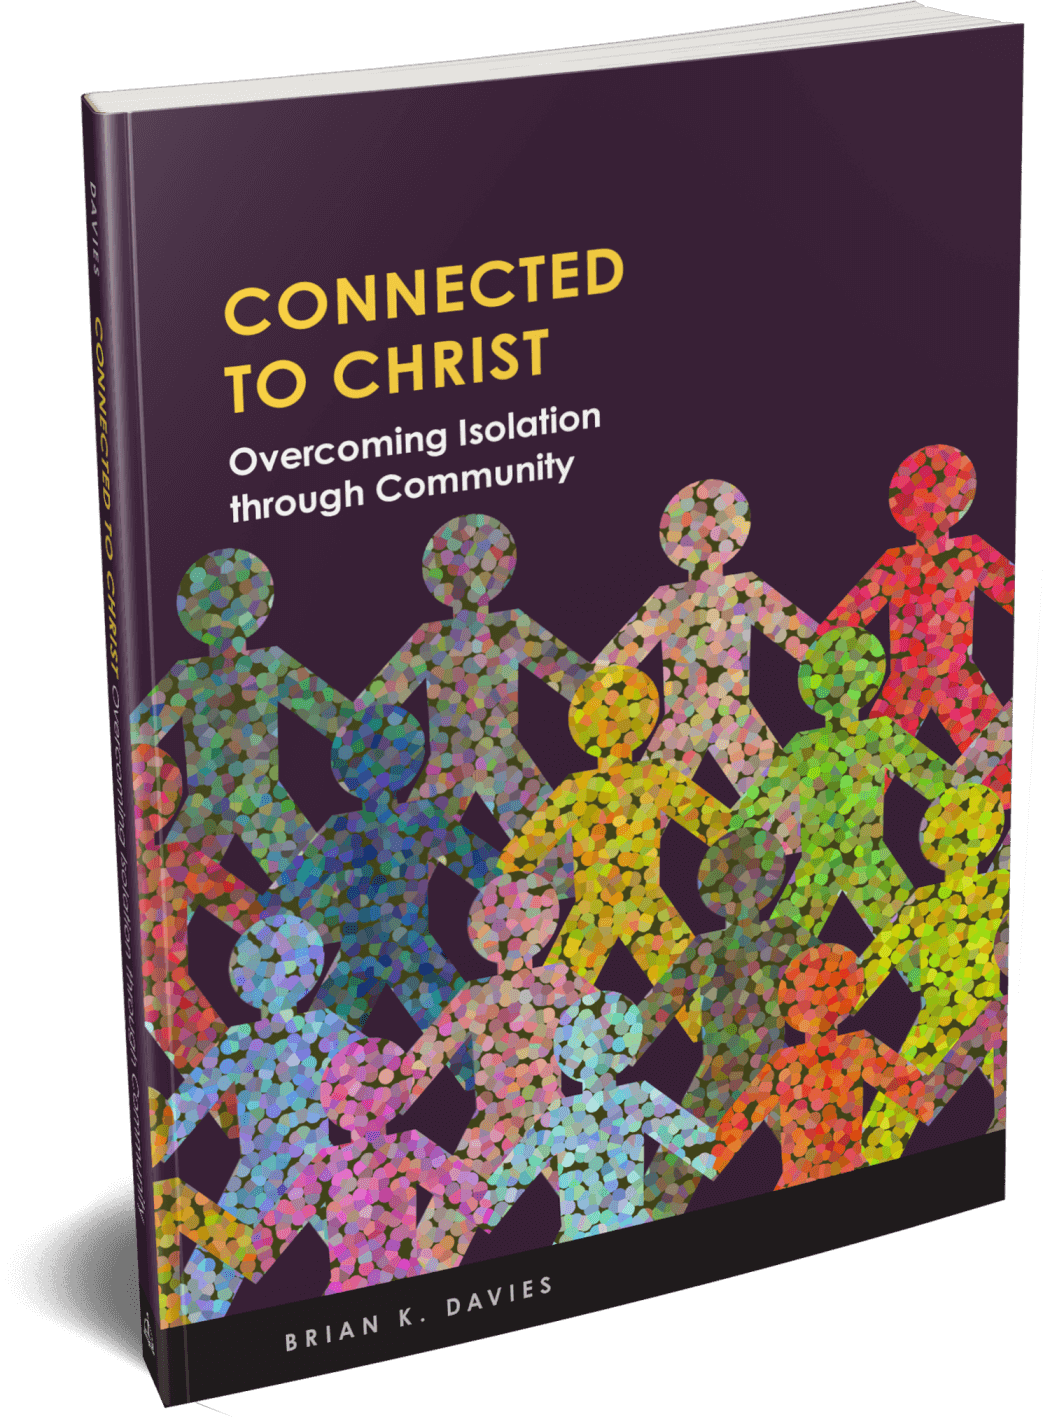 Connected to Christ: Overcoming Isolation through Community